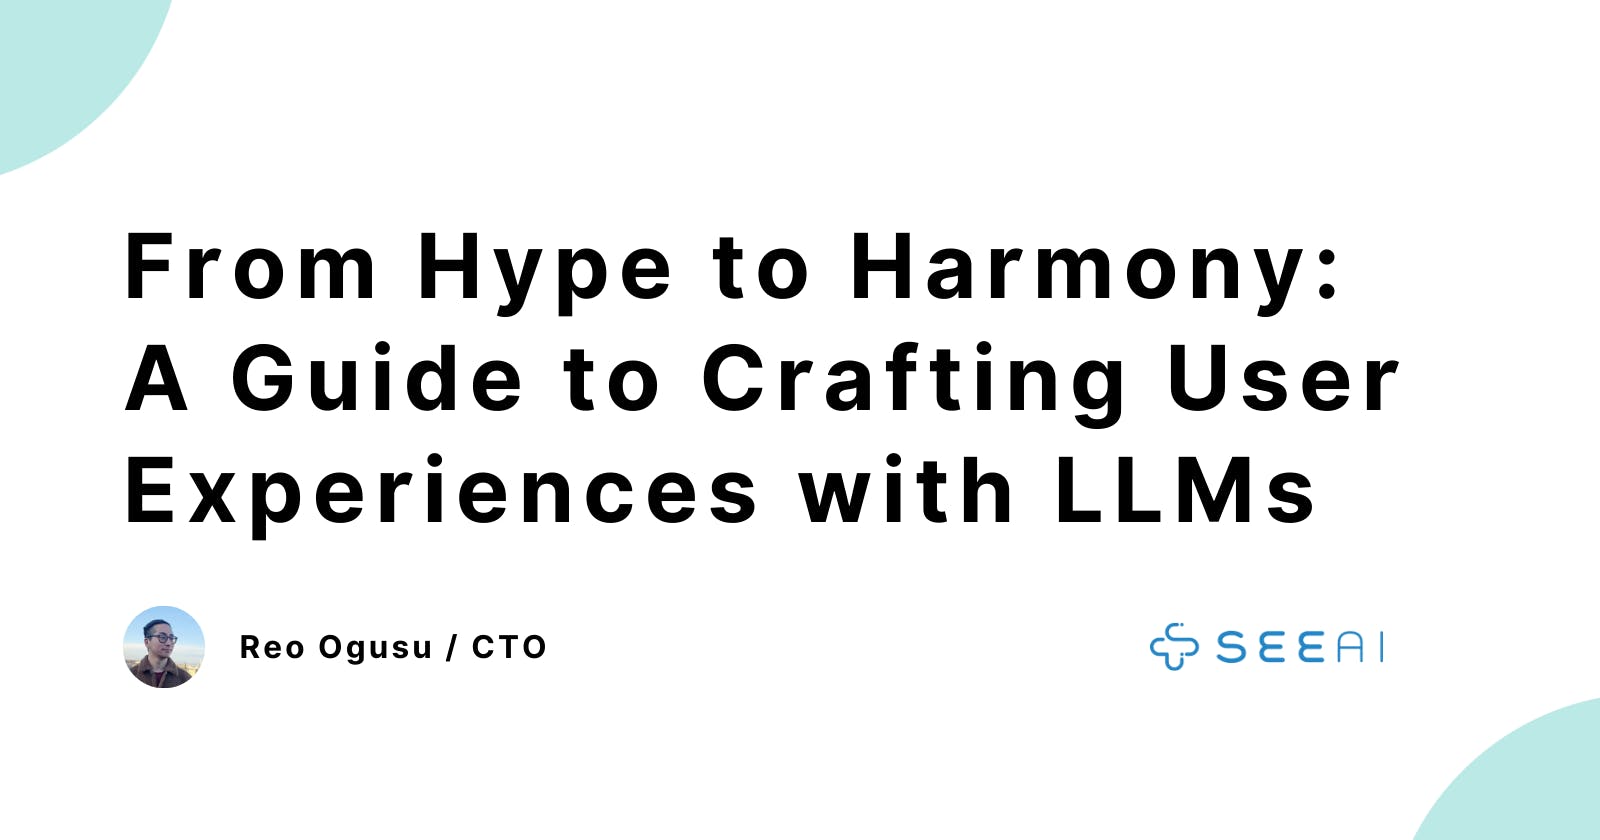 From Hype to Harmony: A Guide to Crafting User Experiences with LLMs